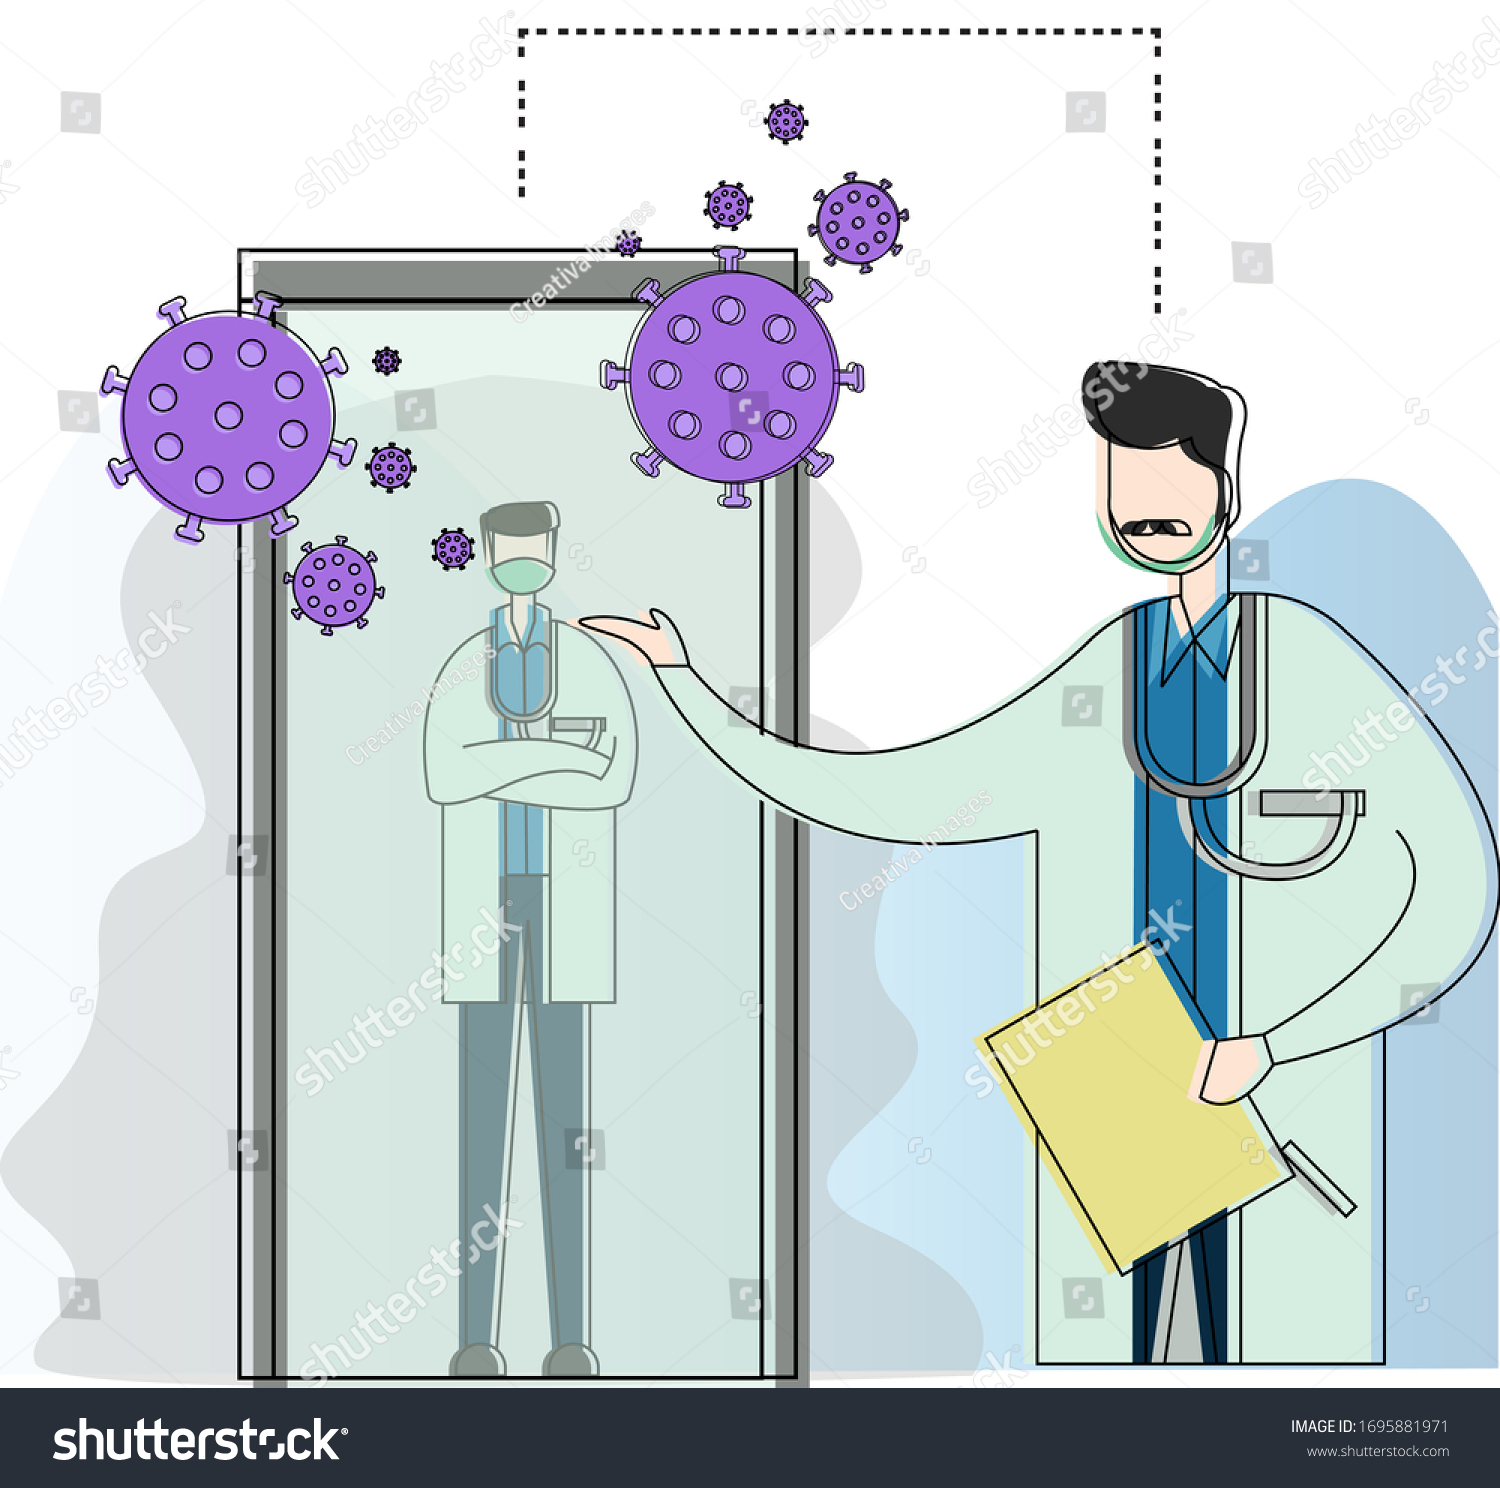 SVG of Sterilization chamber vector concept with two doctors showing how the chamber works, isolated in white background with purple germs icons svg